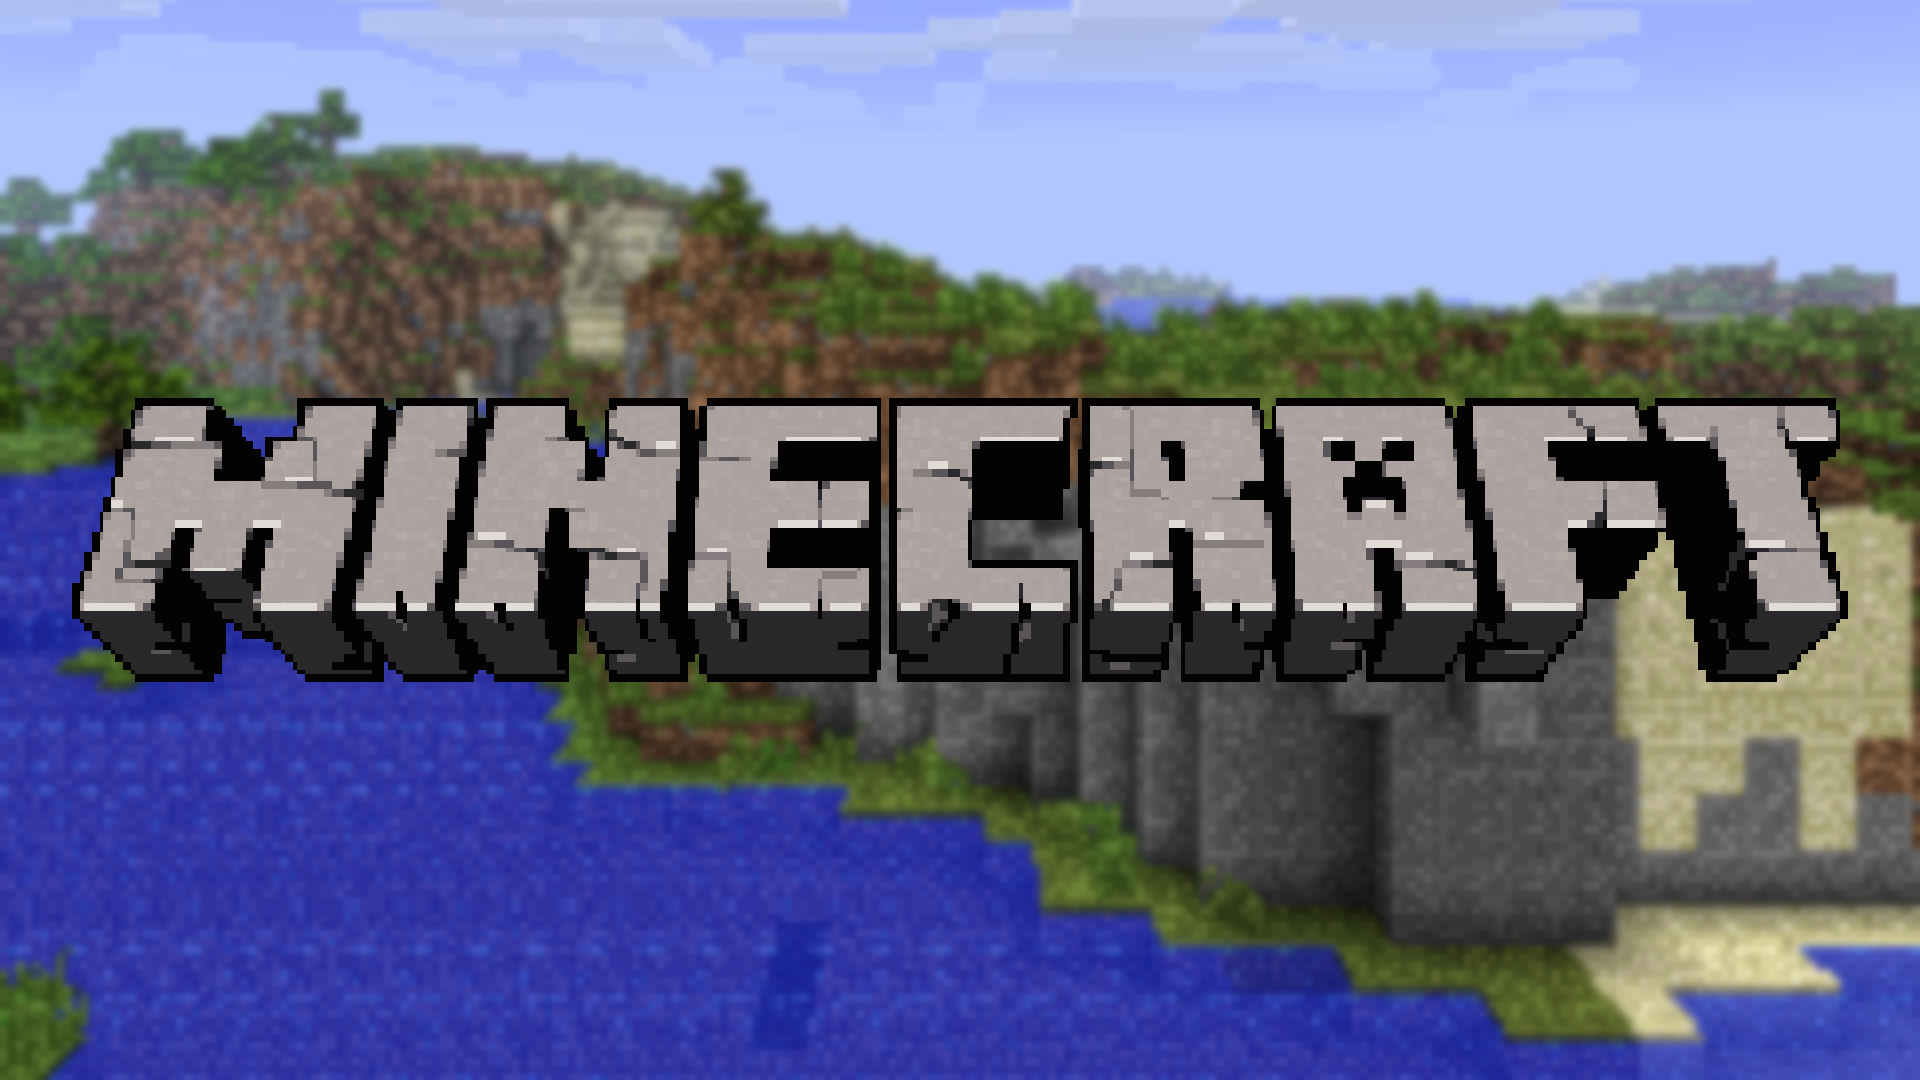 Where Have You Been Minecraft?